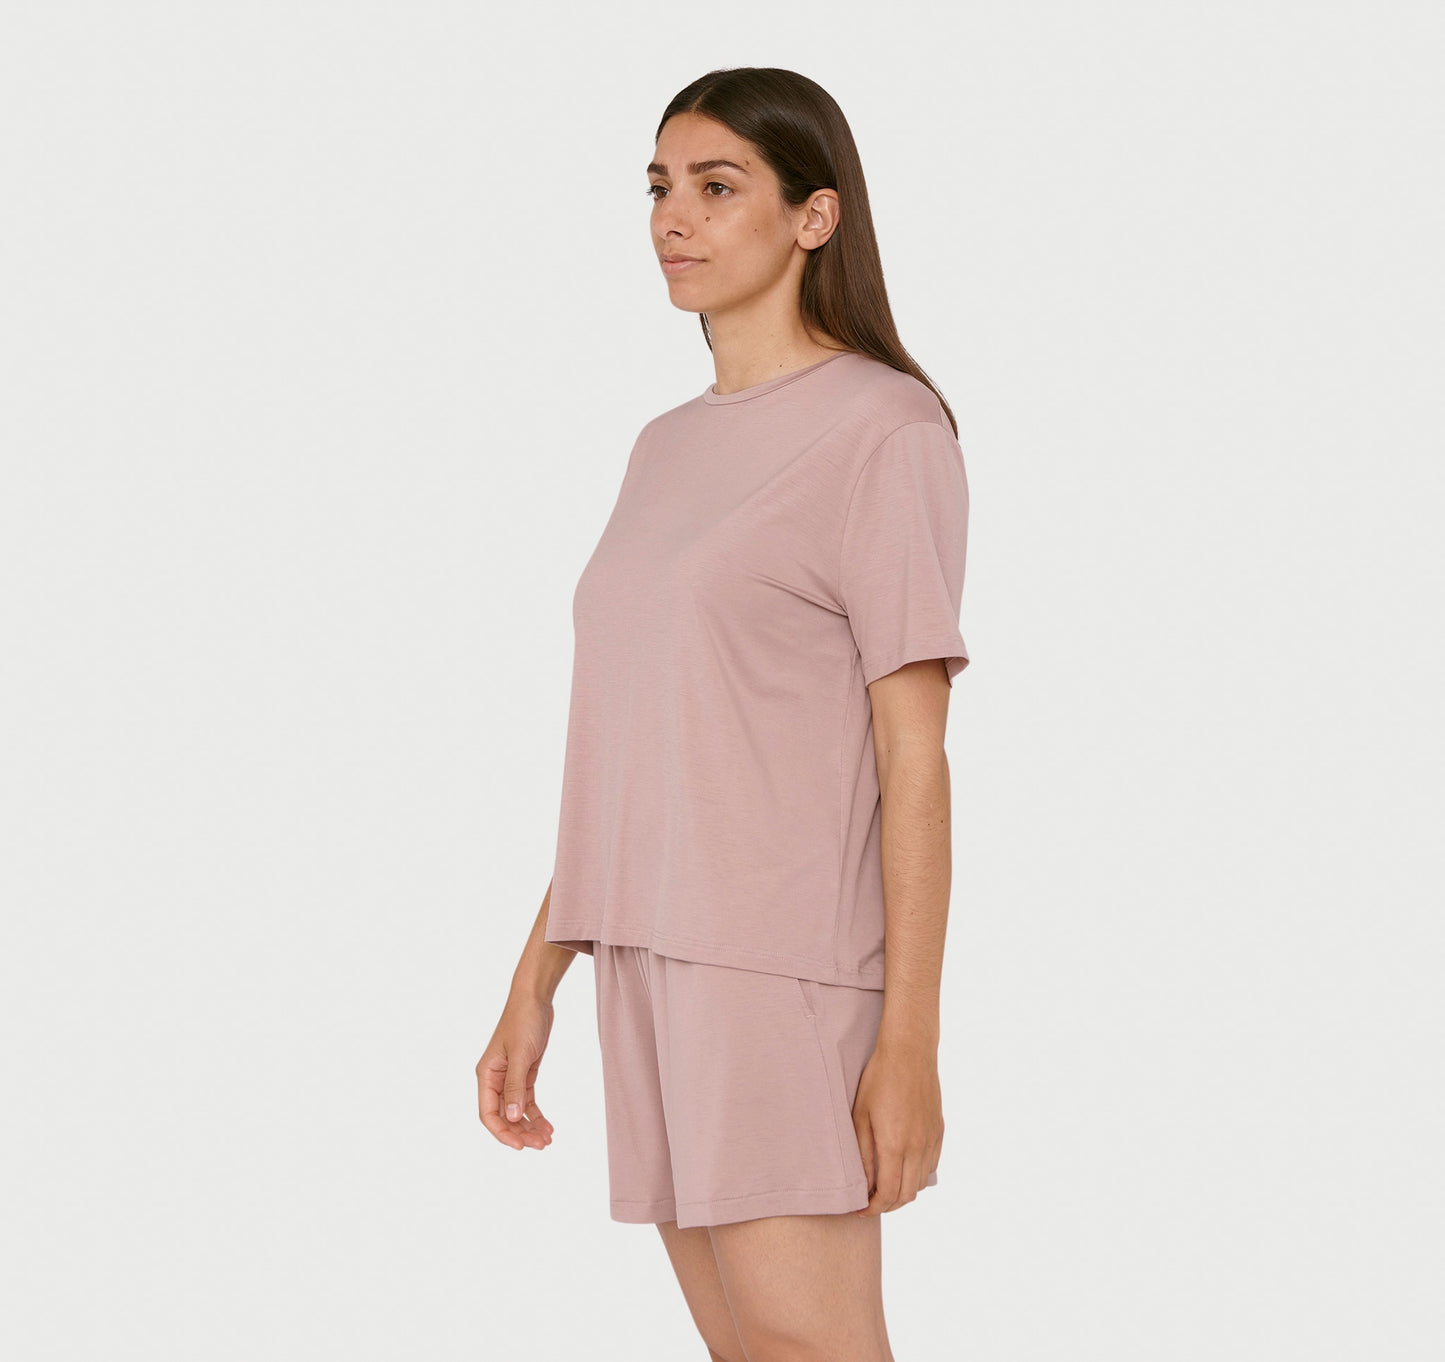 Soft Touch Boxy Tee